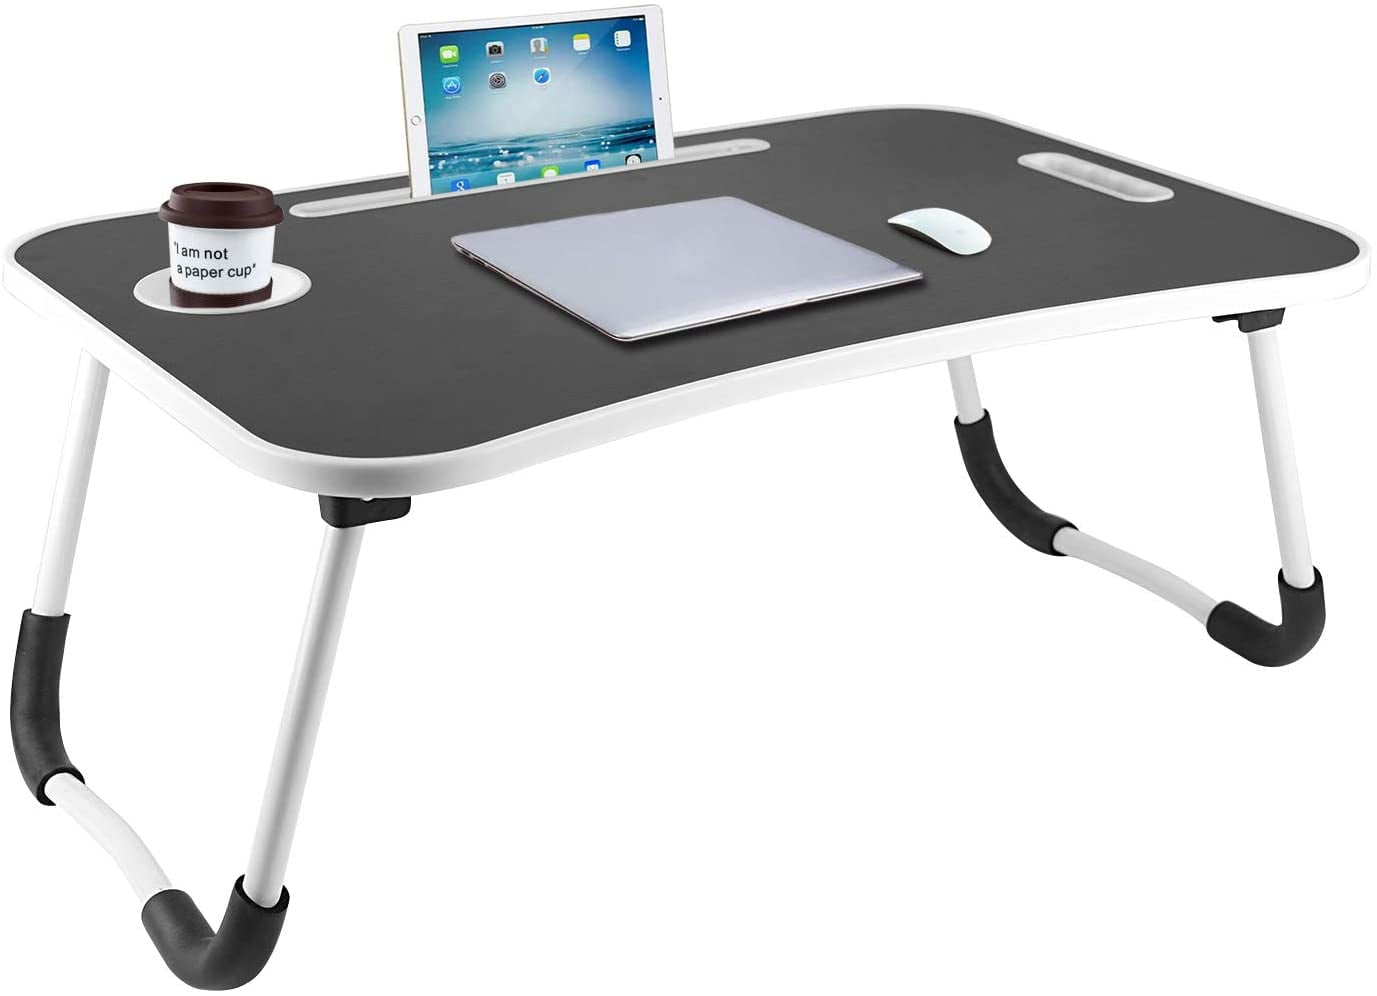 VAIIGO Foldable Laptop Bed Table Portable Lap Desk Notebook Table Dorm Desk with Foldable Legs & Cup Slot & Tablet Groove for Eating Breakfast,Reading,Watching Movie on Bed/Sofa/Floor Black 